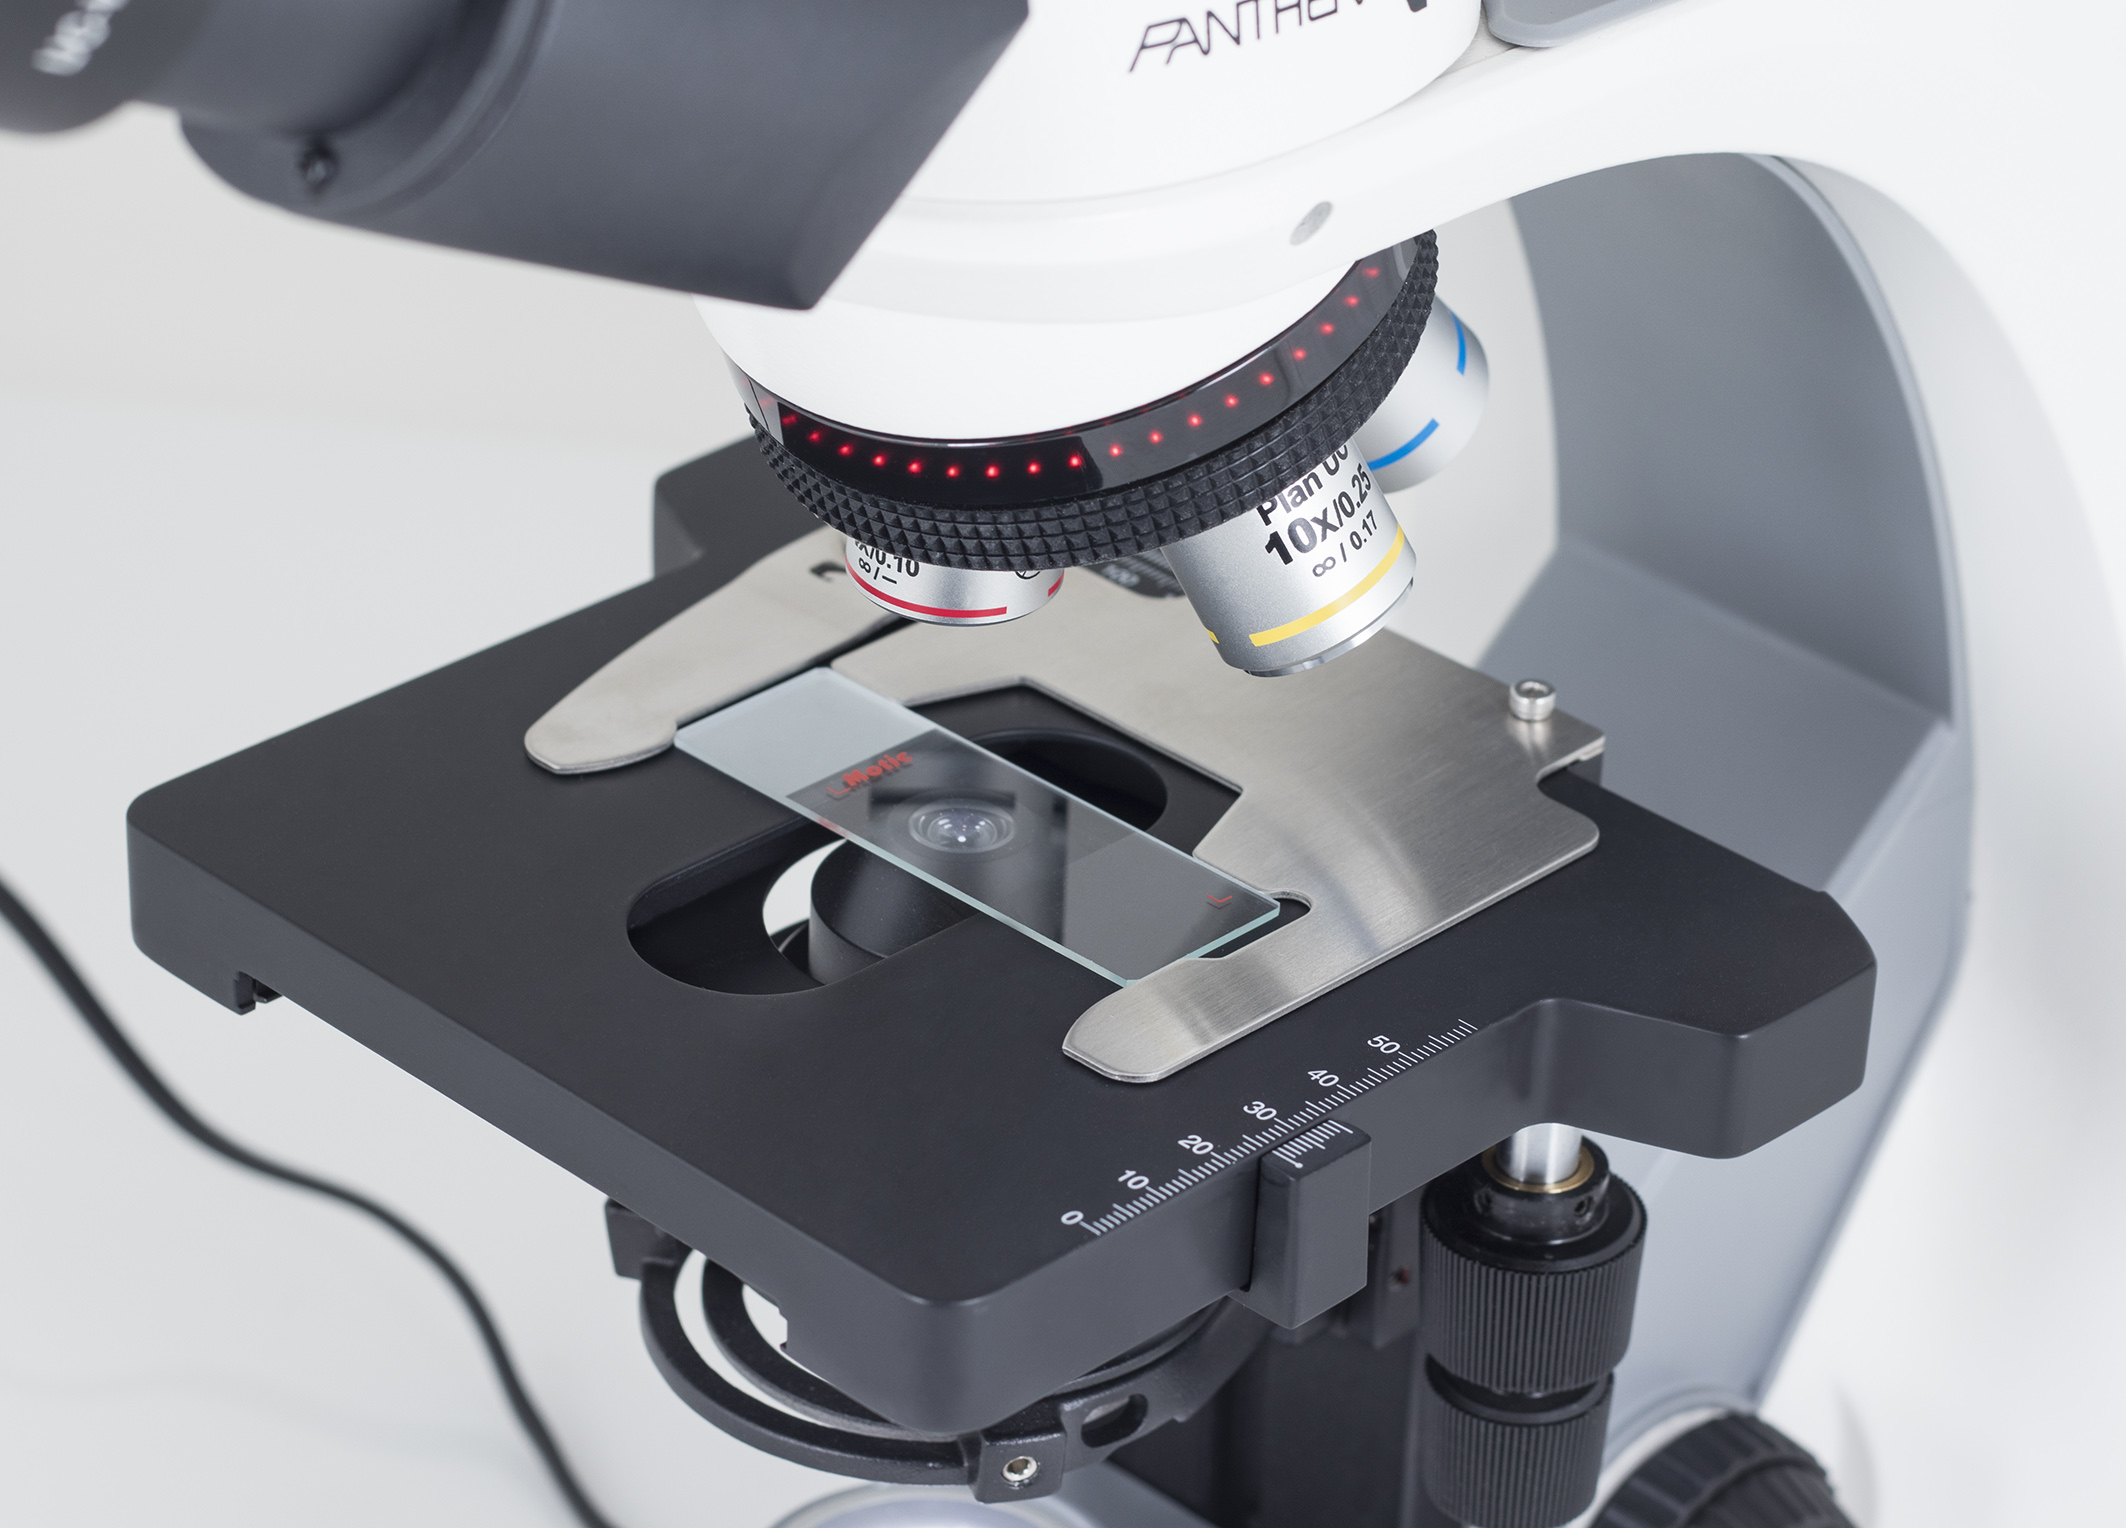 Motic Panthera E2 compound light microscope showing slide on stage.